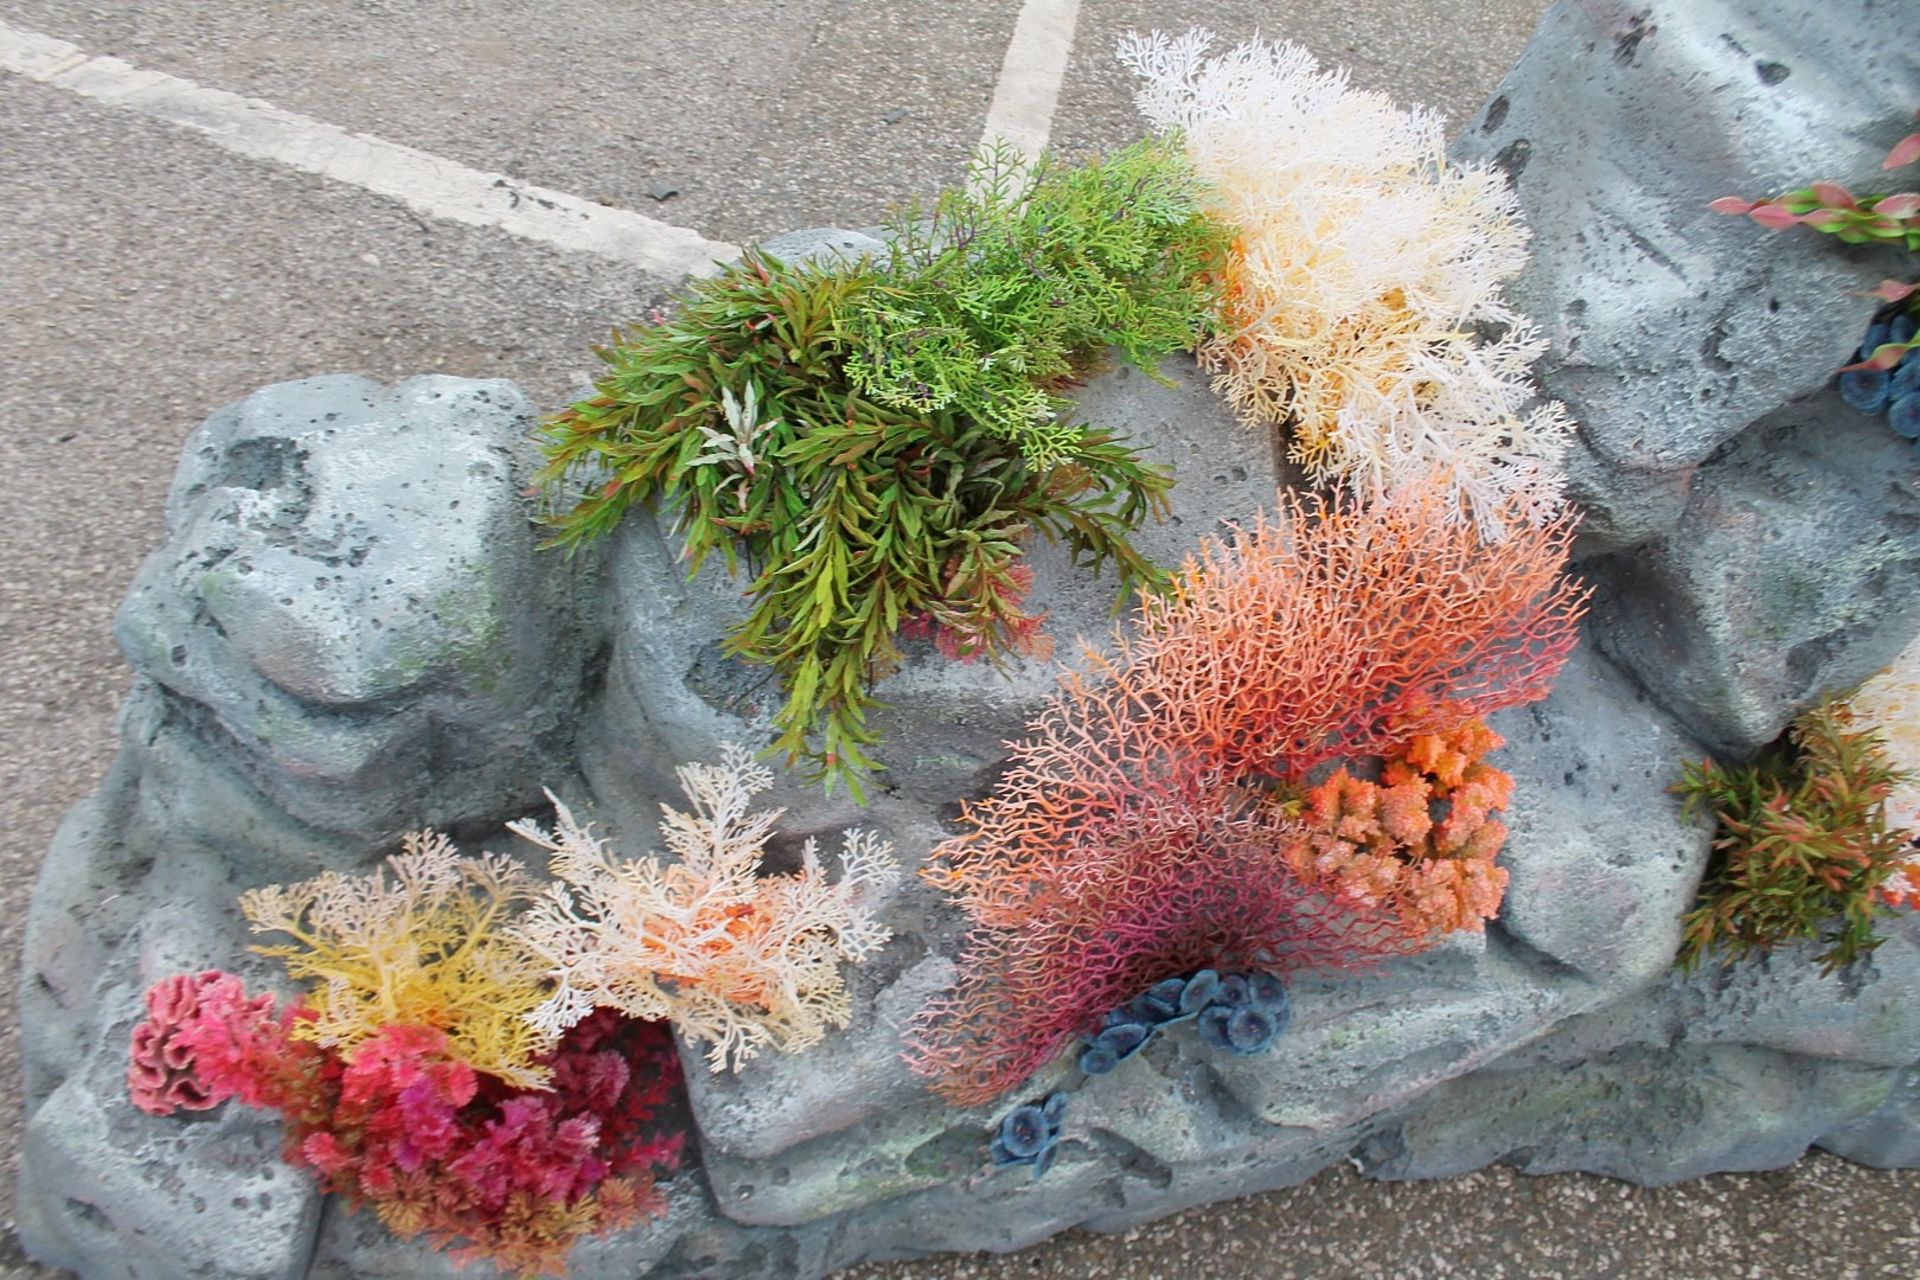 1 x Bespoke Coral Reef Shop Display / Theatre Stage Prop - 2.8 Metres Long - Recently Removed From A - Image 7 of 9